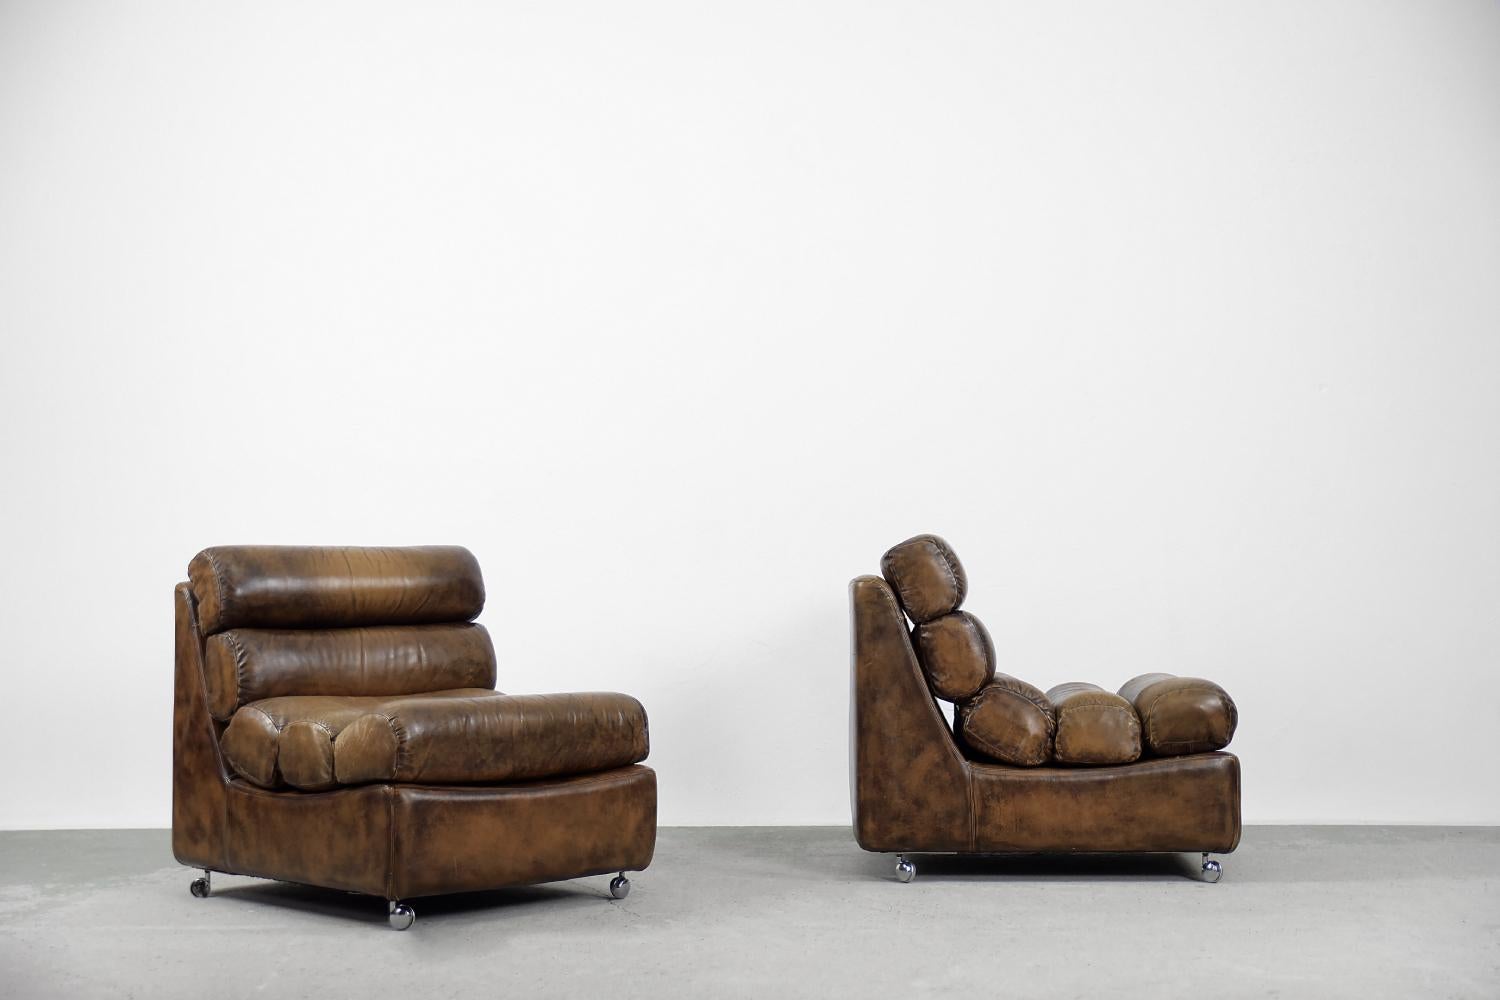 This rare brutalistic set of two armchairs was manufactured in the 1960s. This set has been upholstered with natural leather in shades of brown. The pillow is fastened with strong bur. The chair are characterized by semicircular and aerodynamic